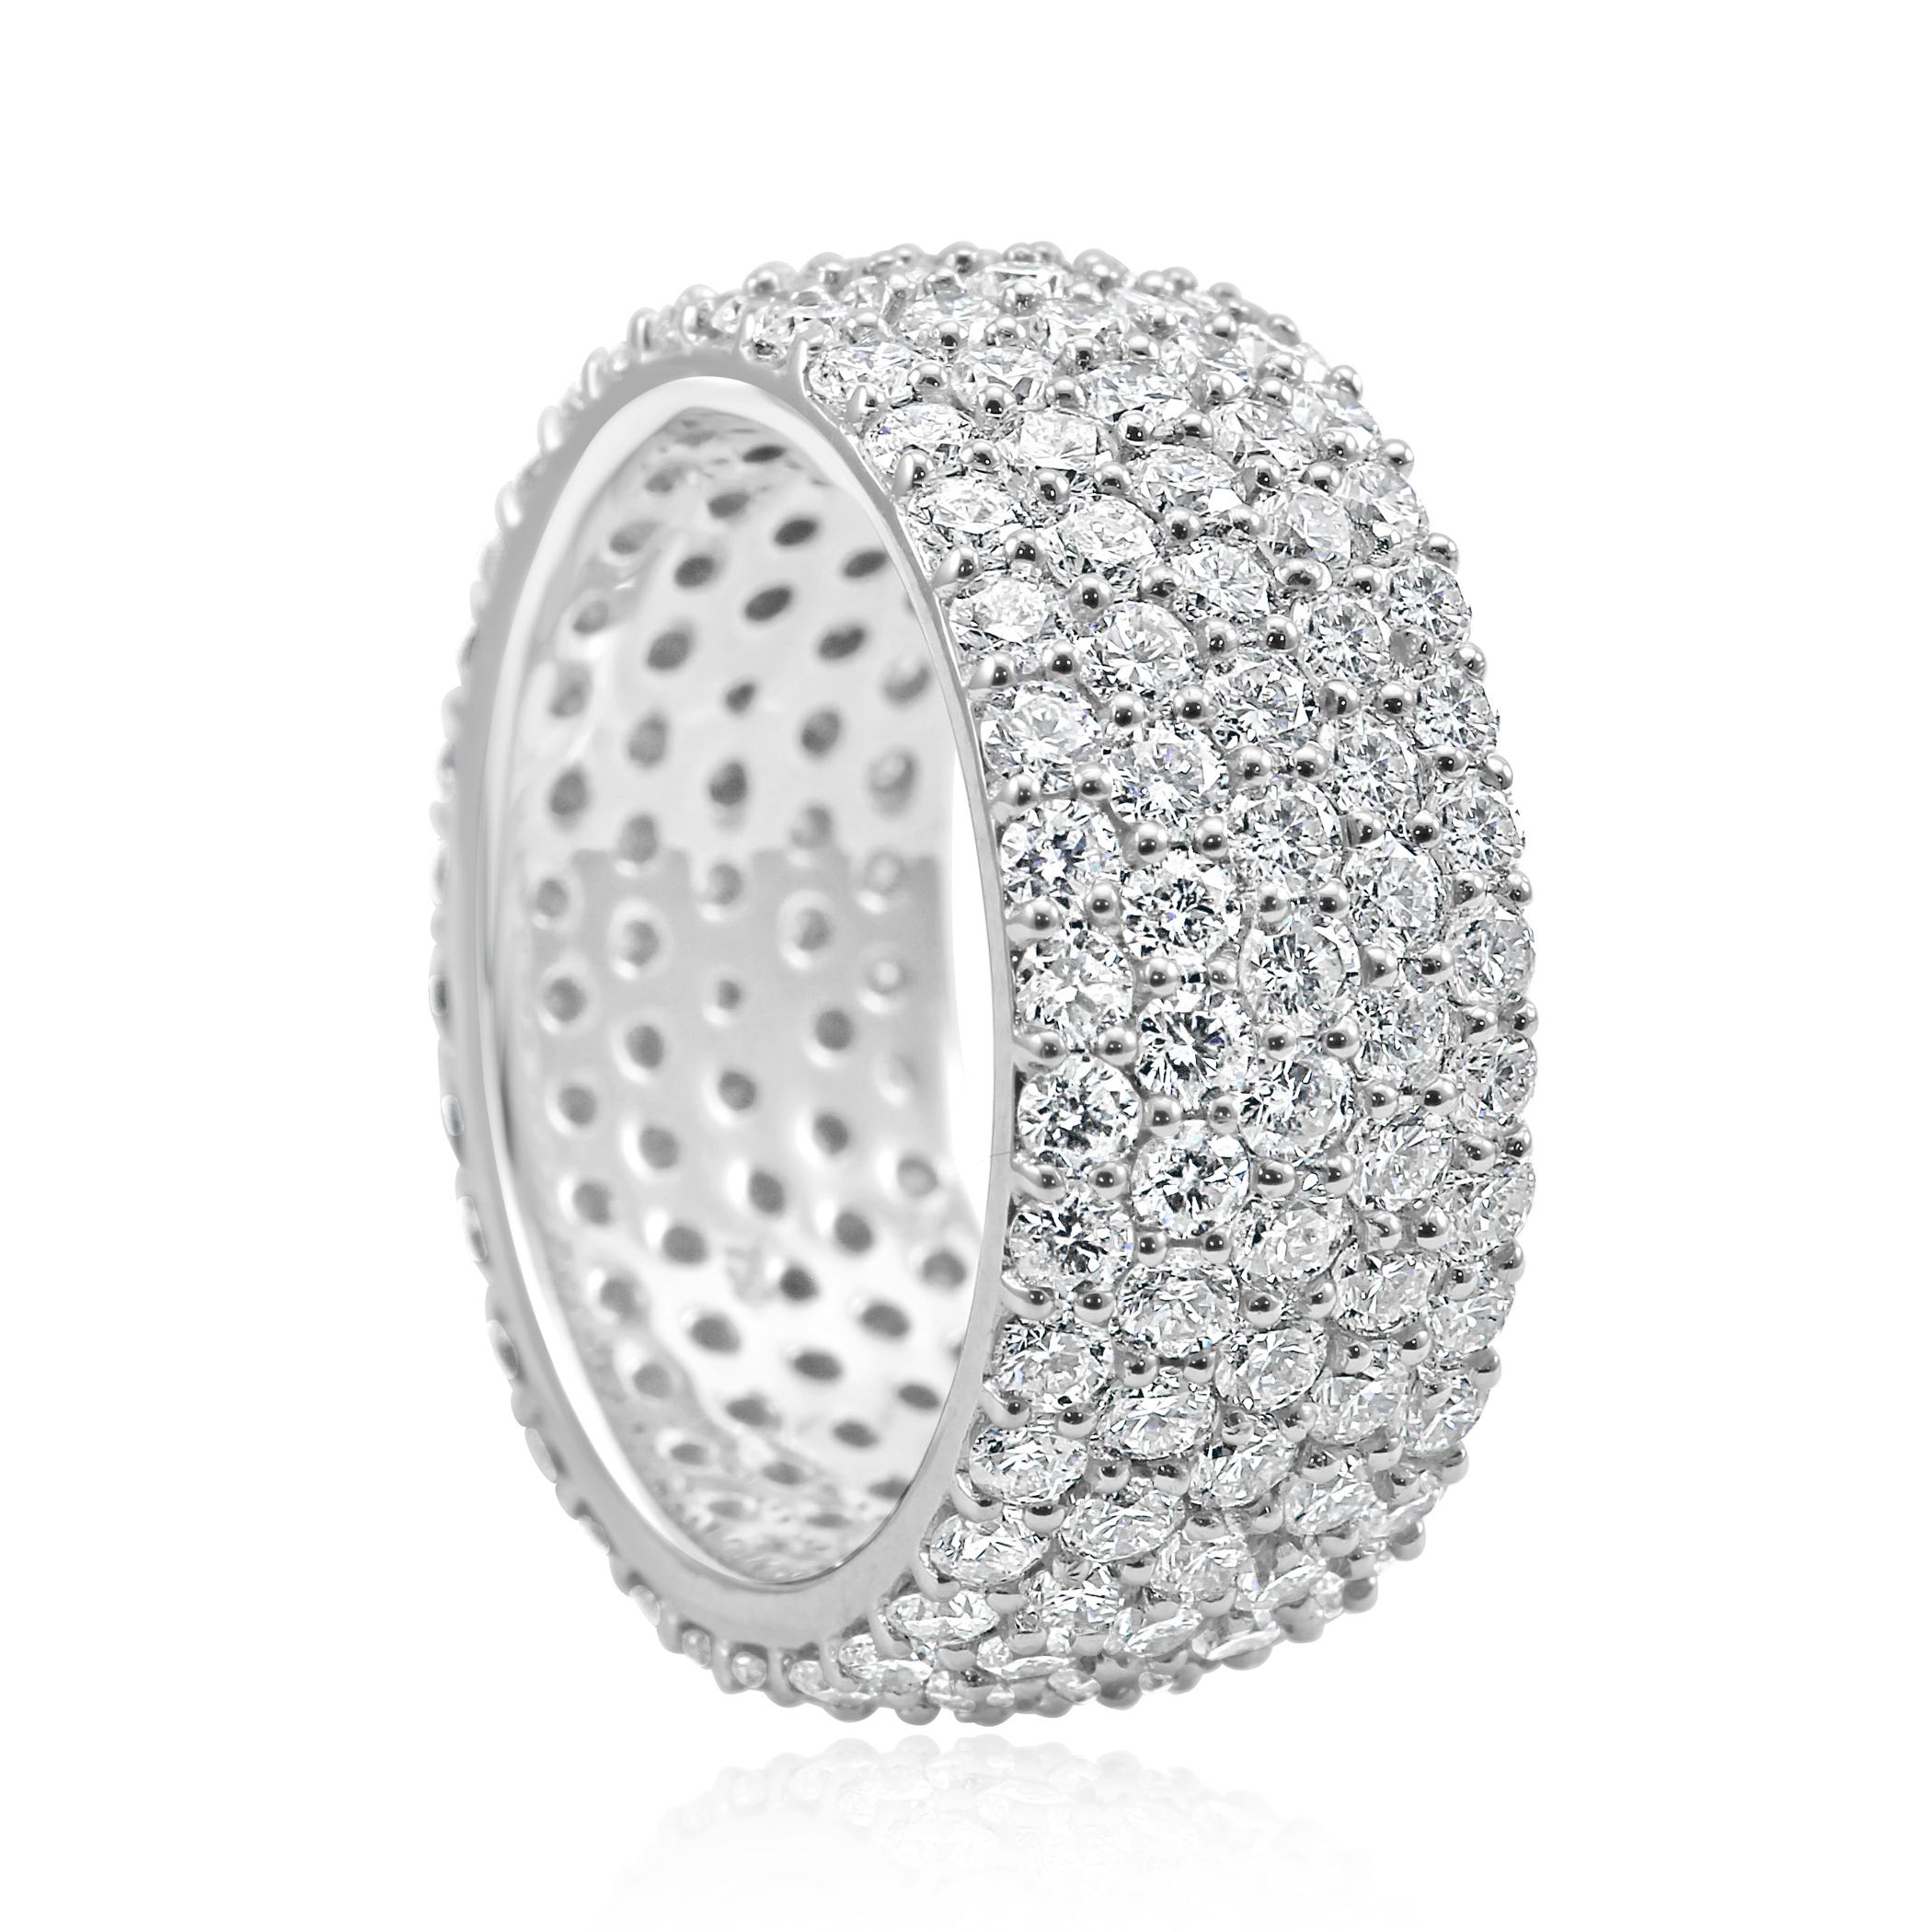 Stunning 5 Rows of 170 White G-H Color SI Clarity Diamond Rounds 4.00 Carat in beautiful 18K White Gold Dome Fashion Cocktail Eternity Band Ring .

Total Diamond Weight 4.00 Carat

Style can be customized or custom made as per your requirements in